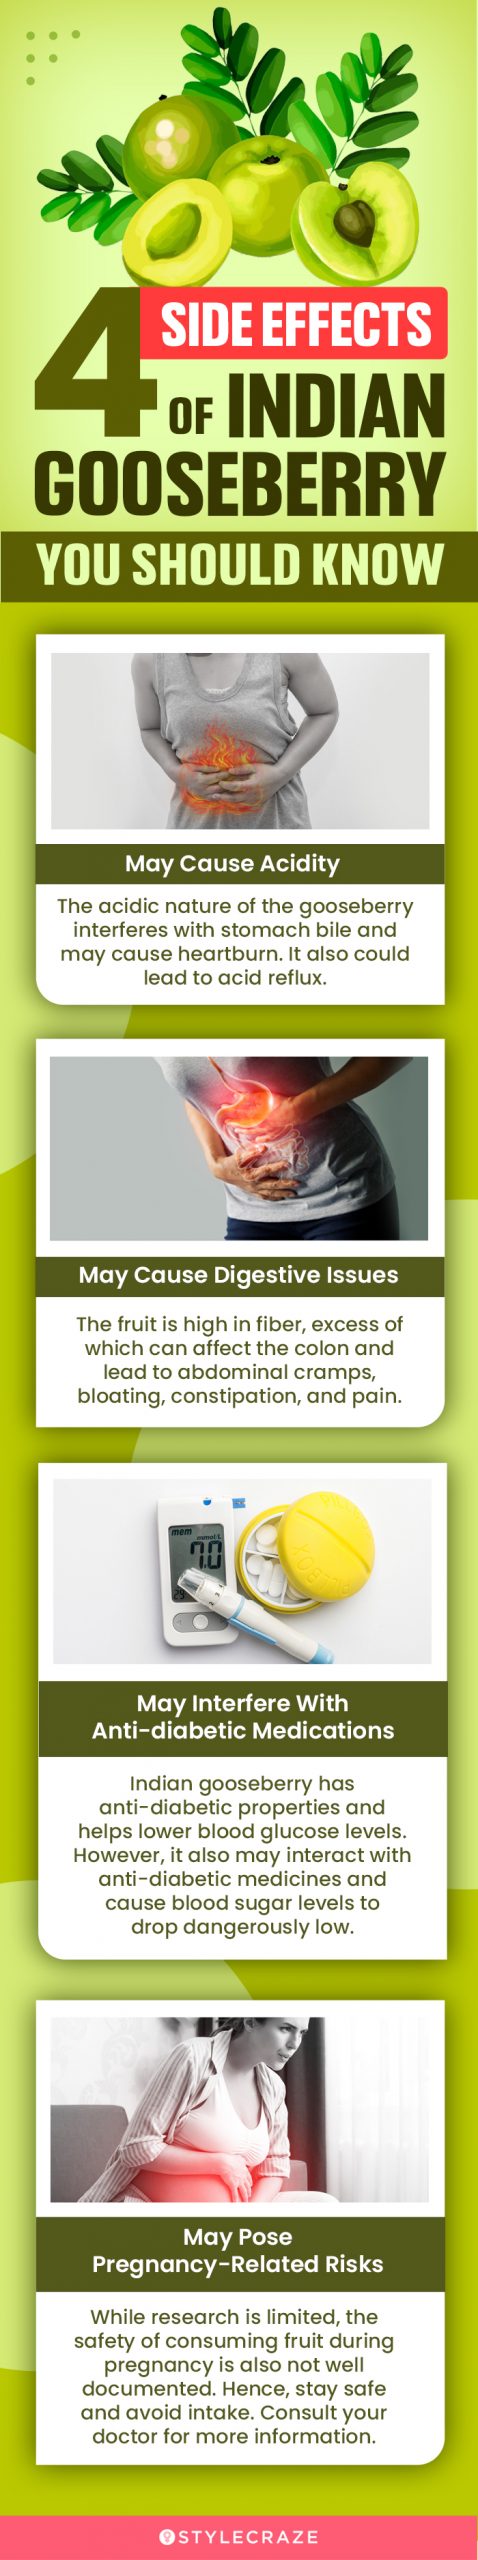 4 side effects of indian gooseberry (infographic) width=